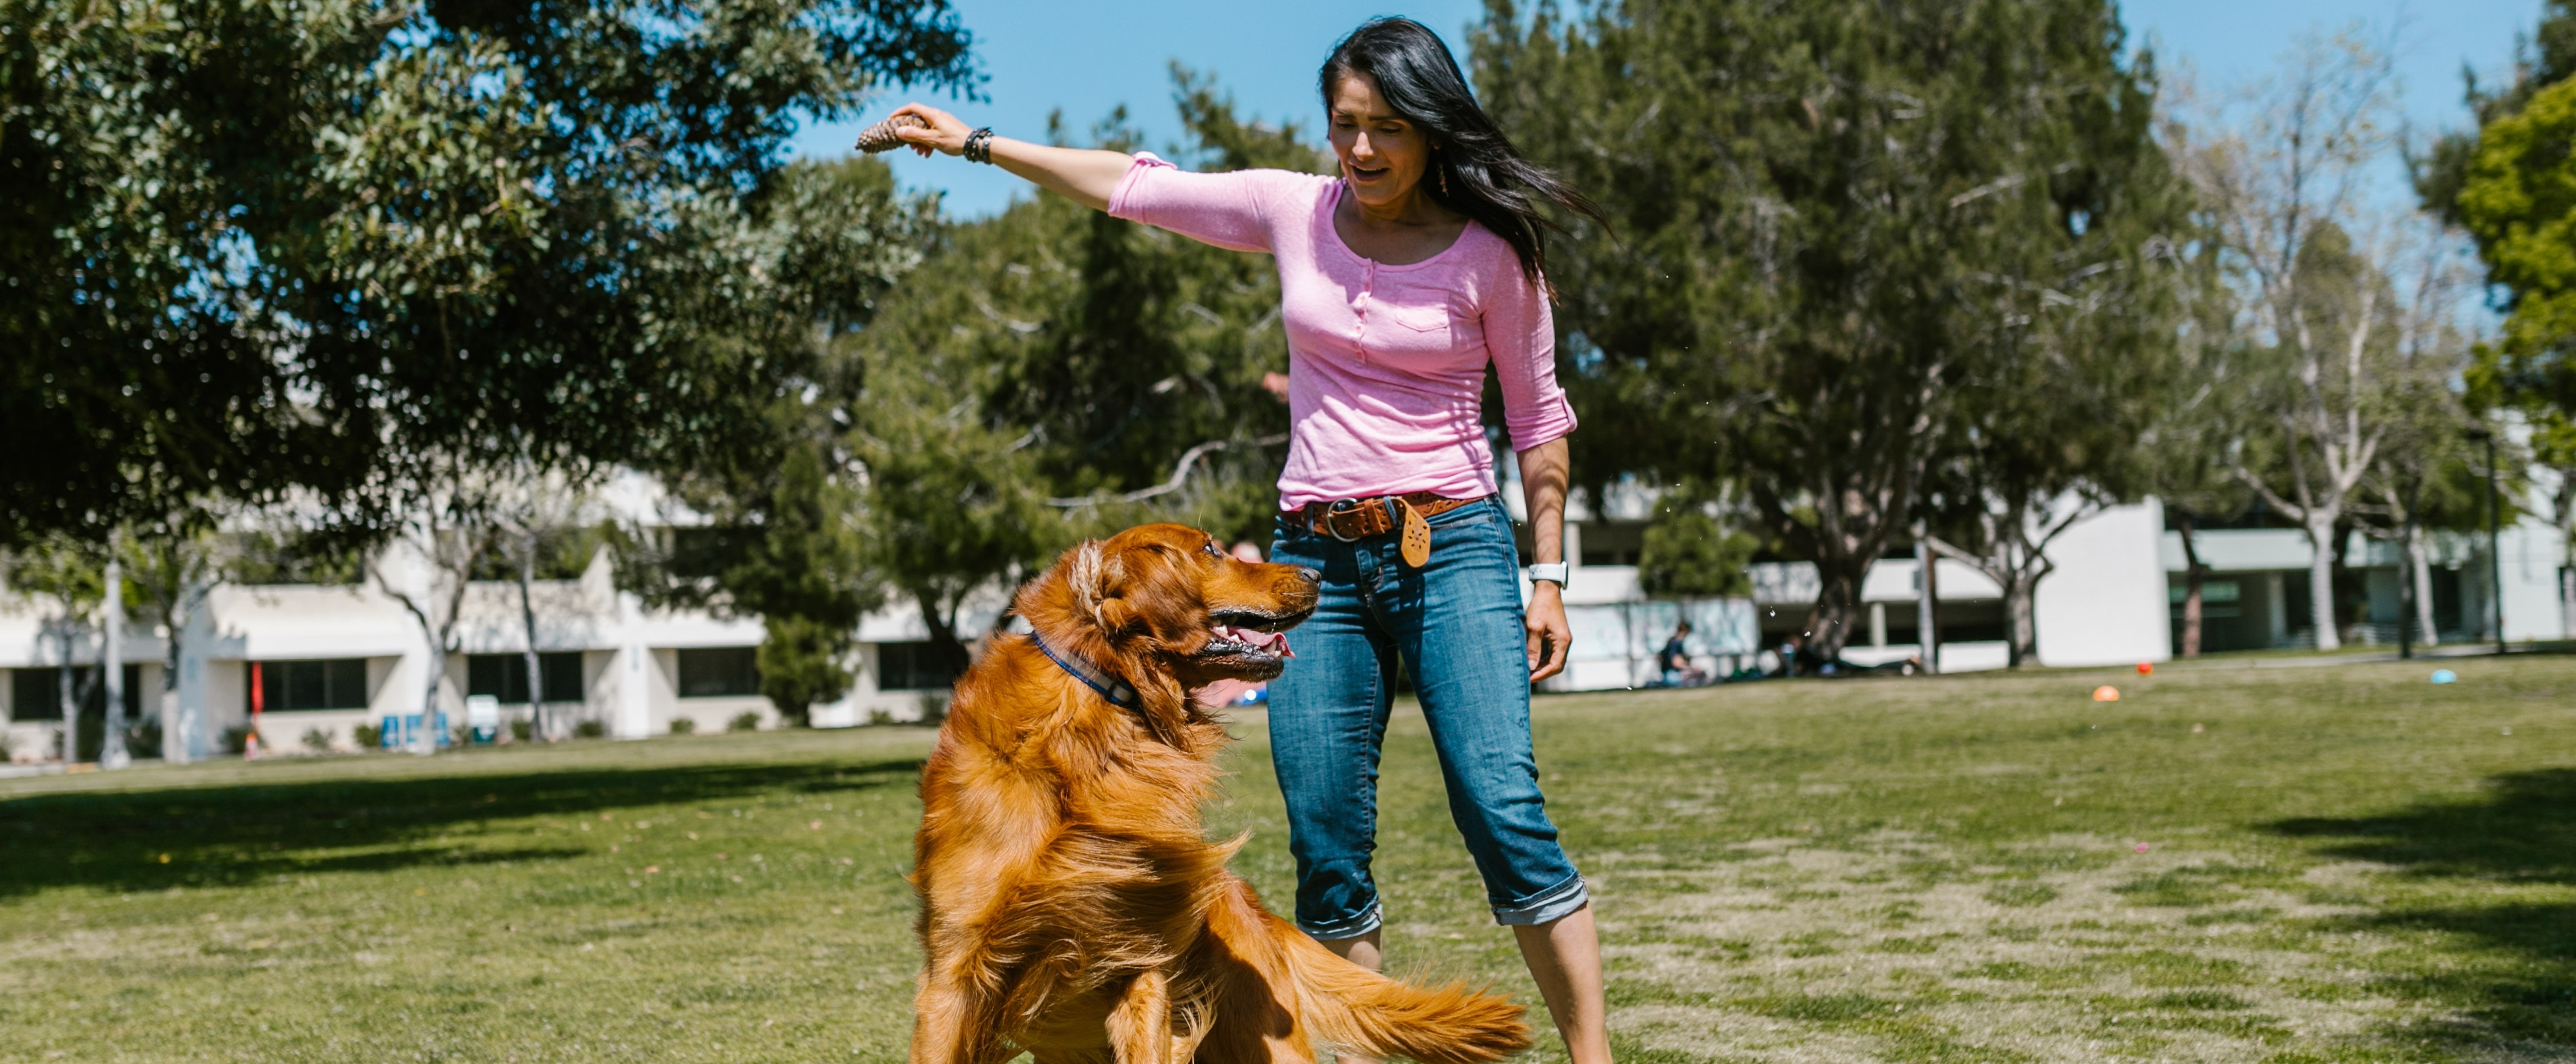 DaySmart  Brain Games for Dogs: Promoting a Happy Disposition